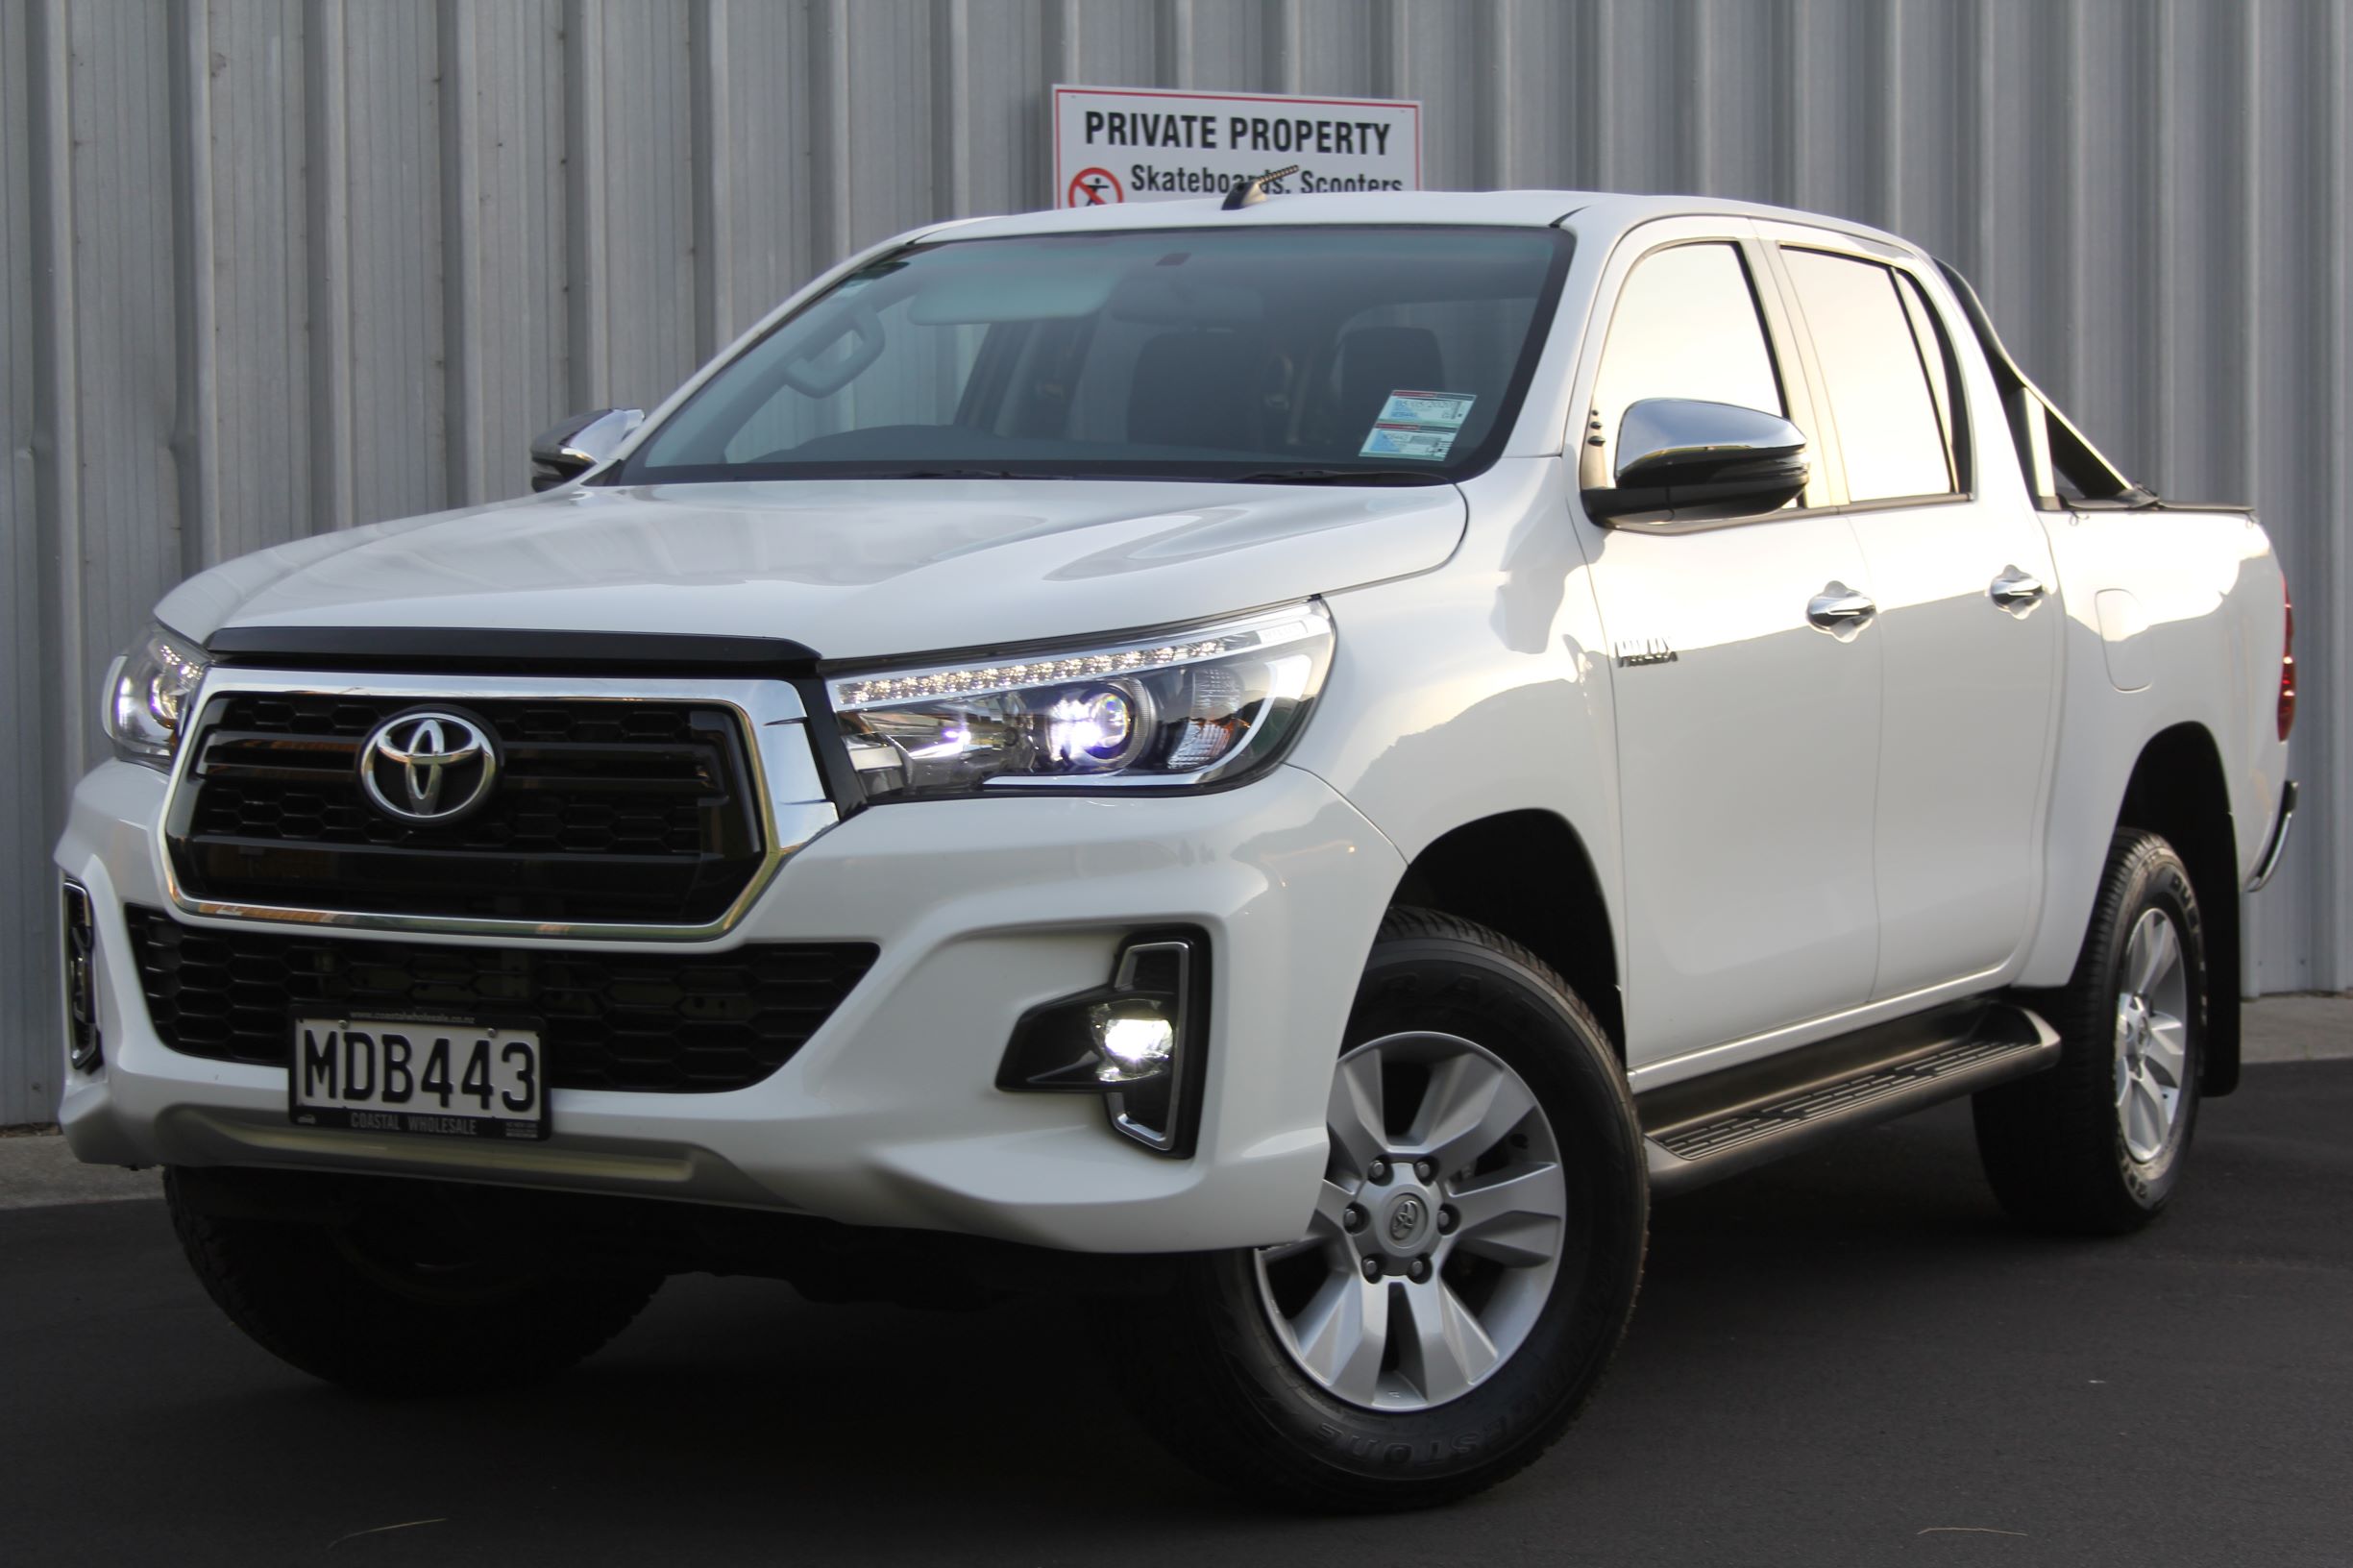 Toyota Hilux SR5 2019 for sale in Auckland